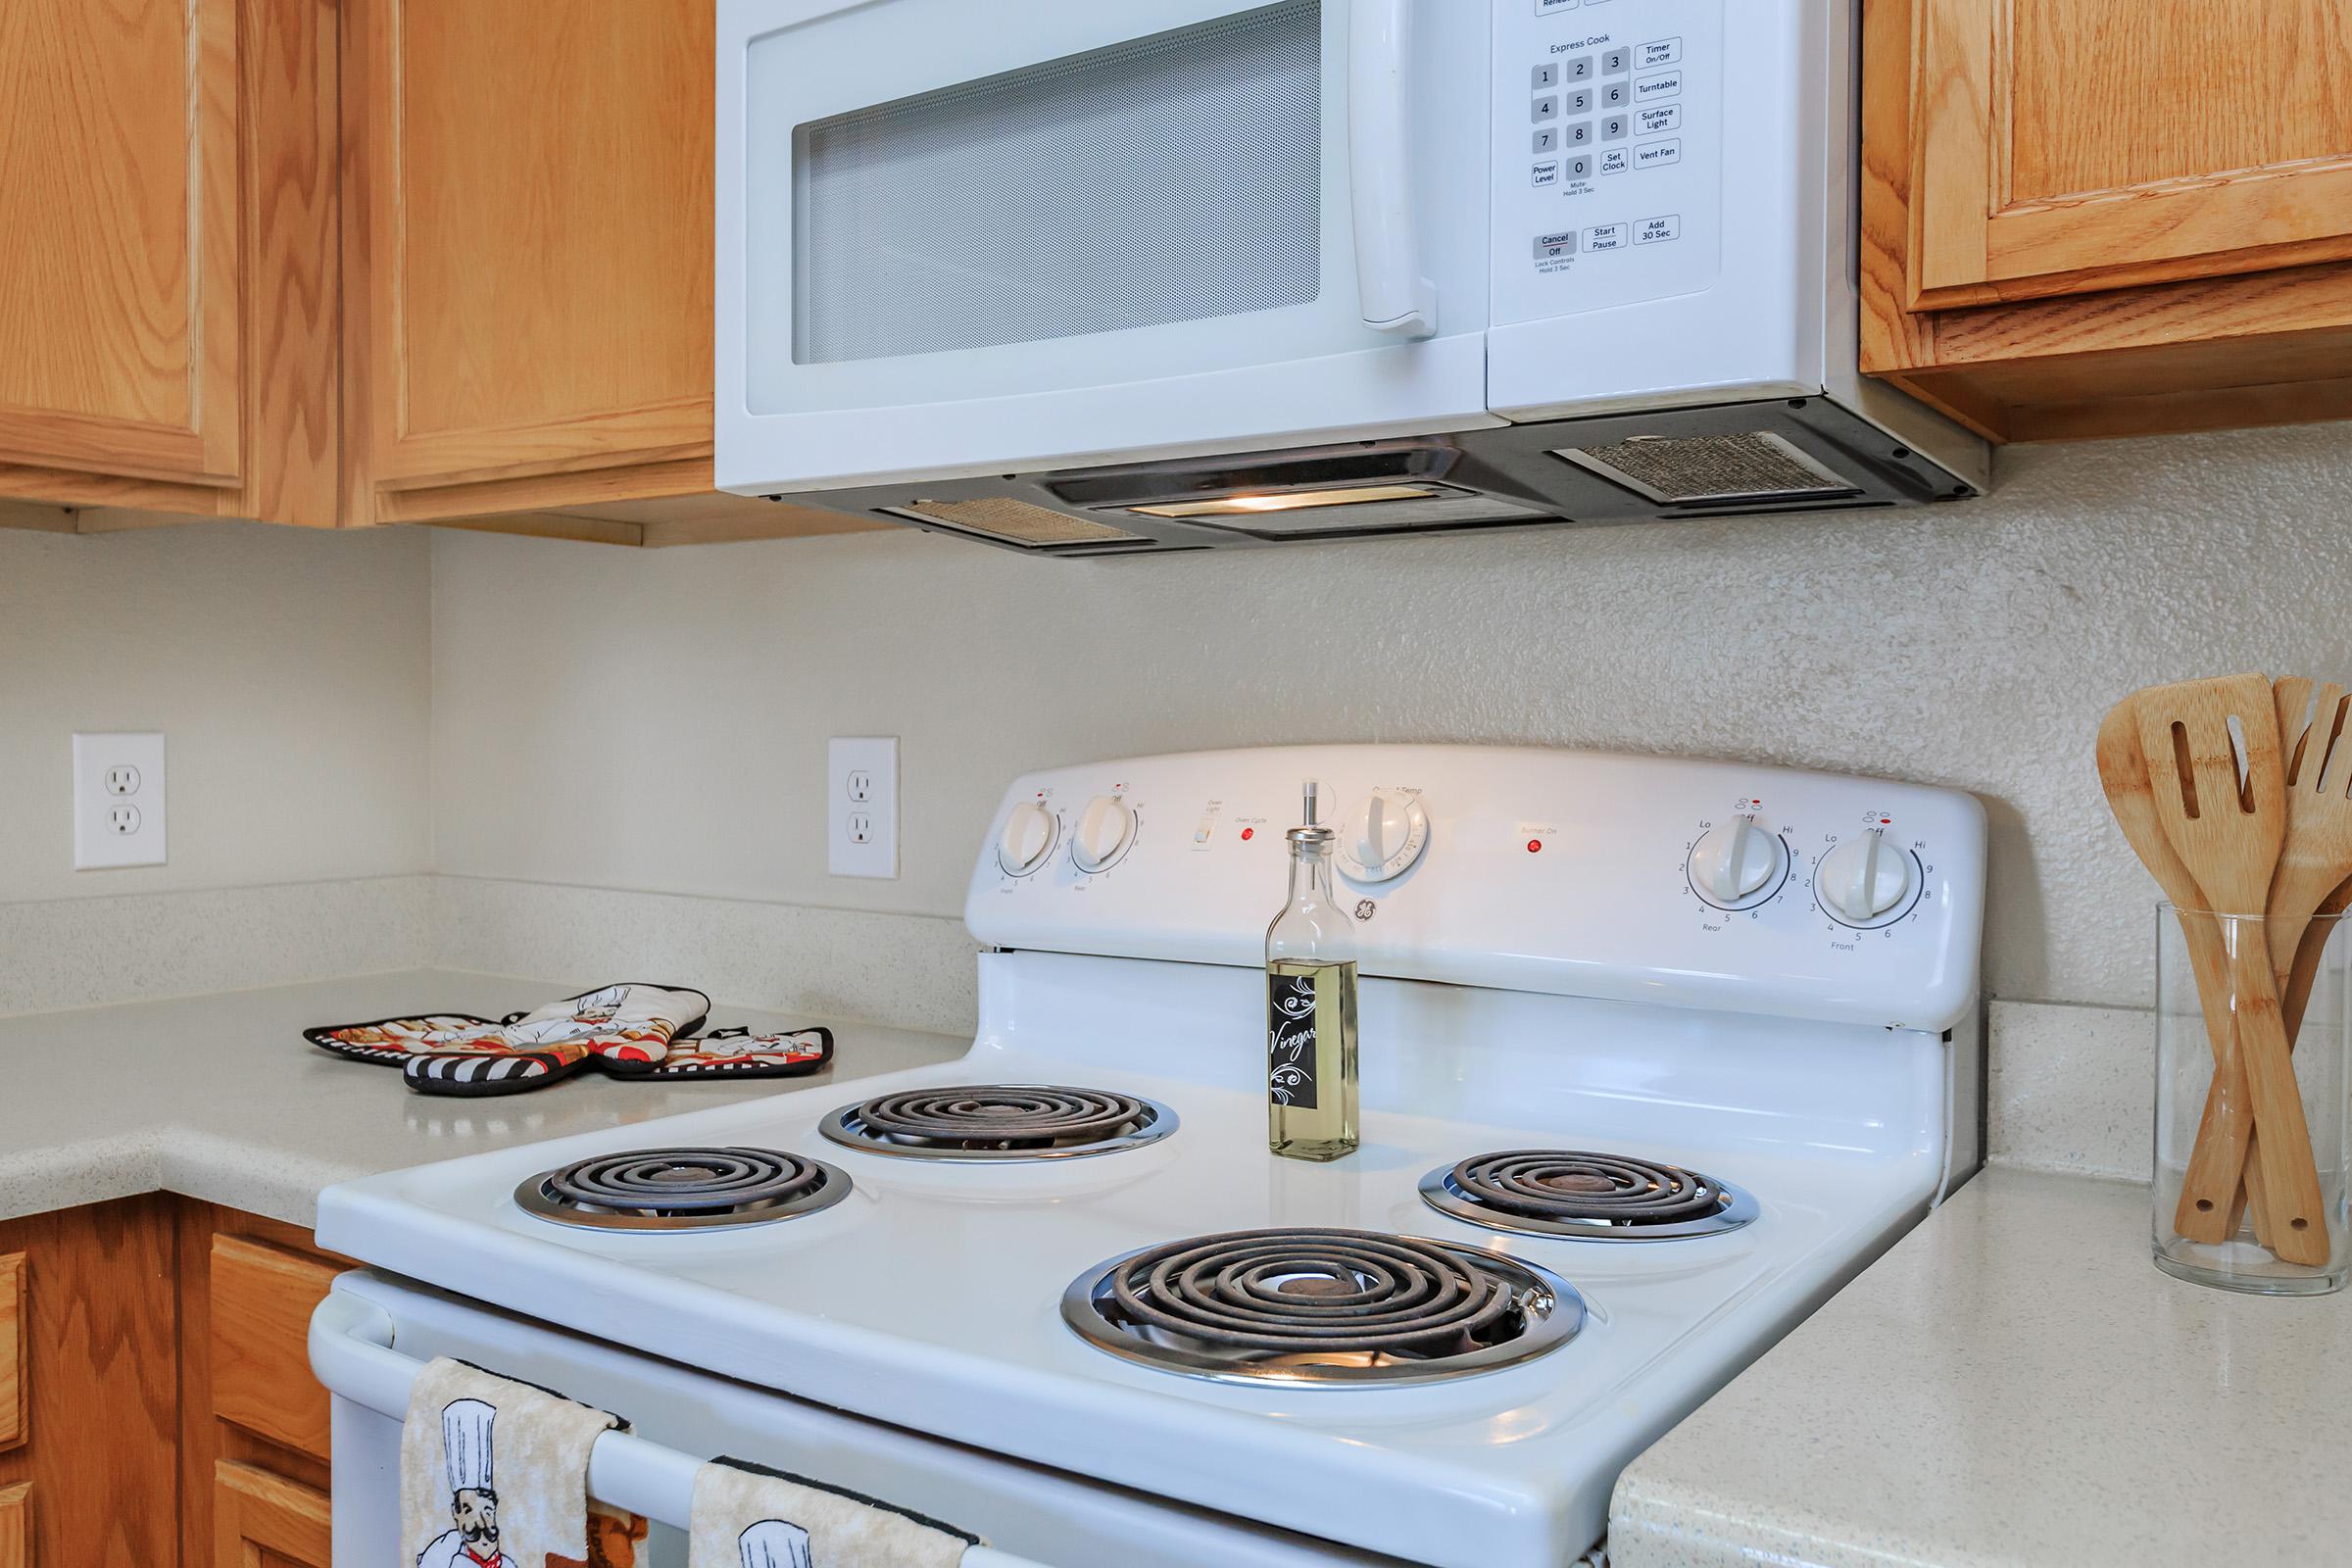 MICROWAVE AND PANTRY IN KITCHEN AT SOUTHPARK RANCH APARTMENTS